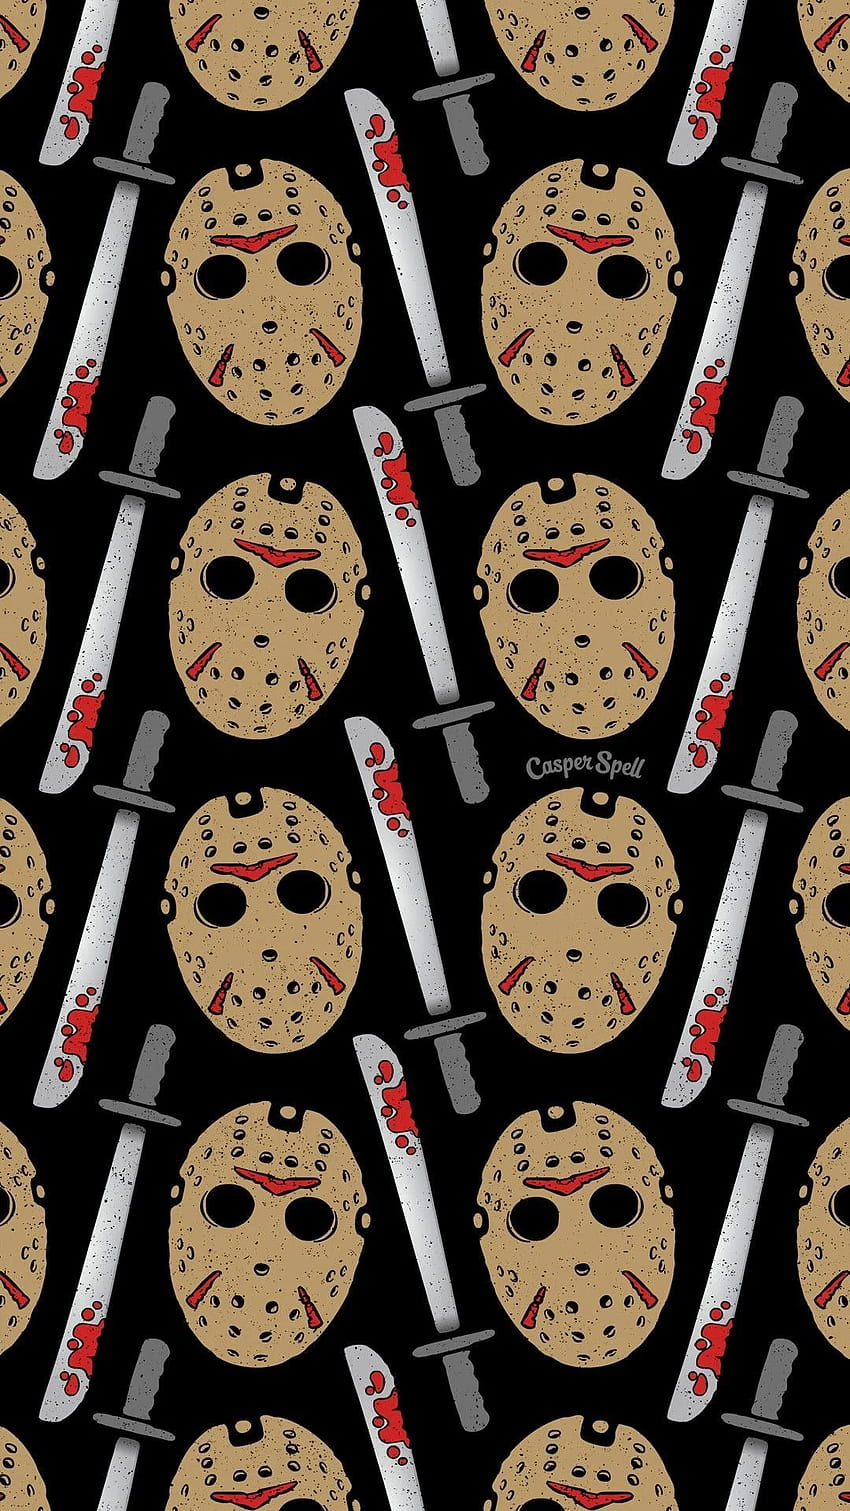 Friday the 13th Jason Voorhees repeat pattern art surface design illustration background patte. Halloween iphone, iPhone , Horror art HD phone wallpaper